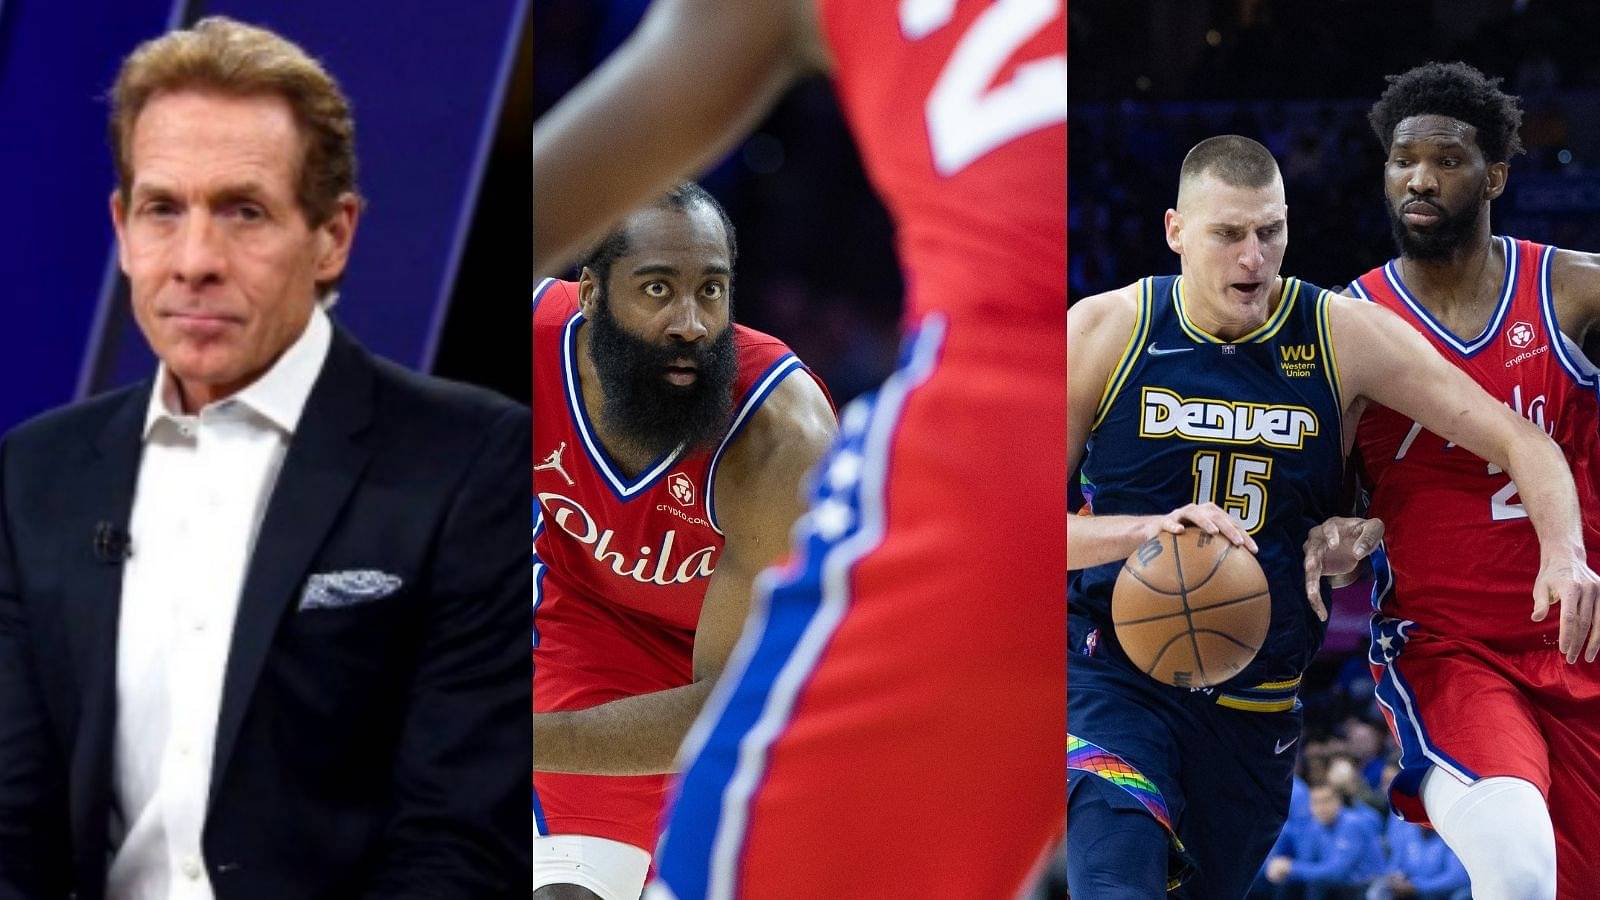 "Nikola Jokic won the game because he had Bones Hyland and Joel Embiid did not..": Skip Bayless takes a subtle shot at James Harden as Sixers go down 114-110 against Joker's team